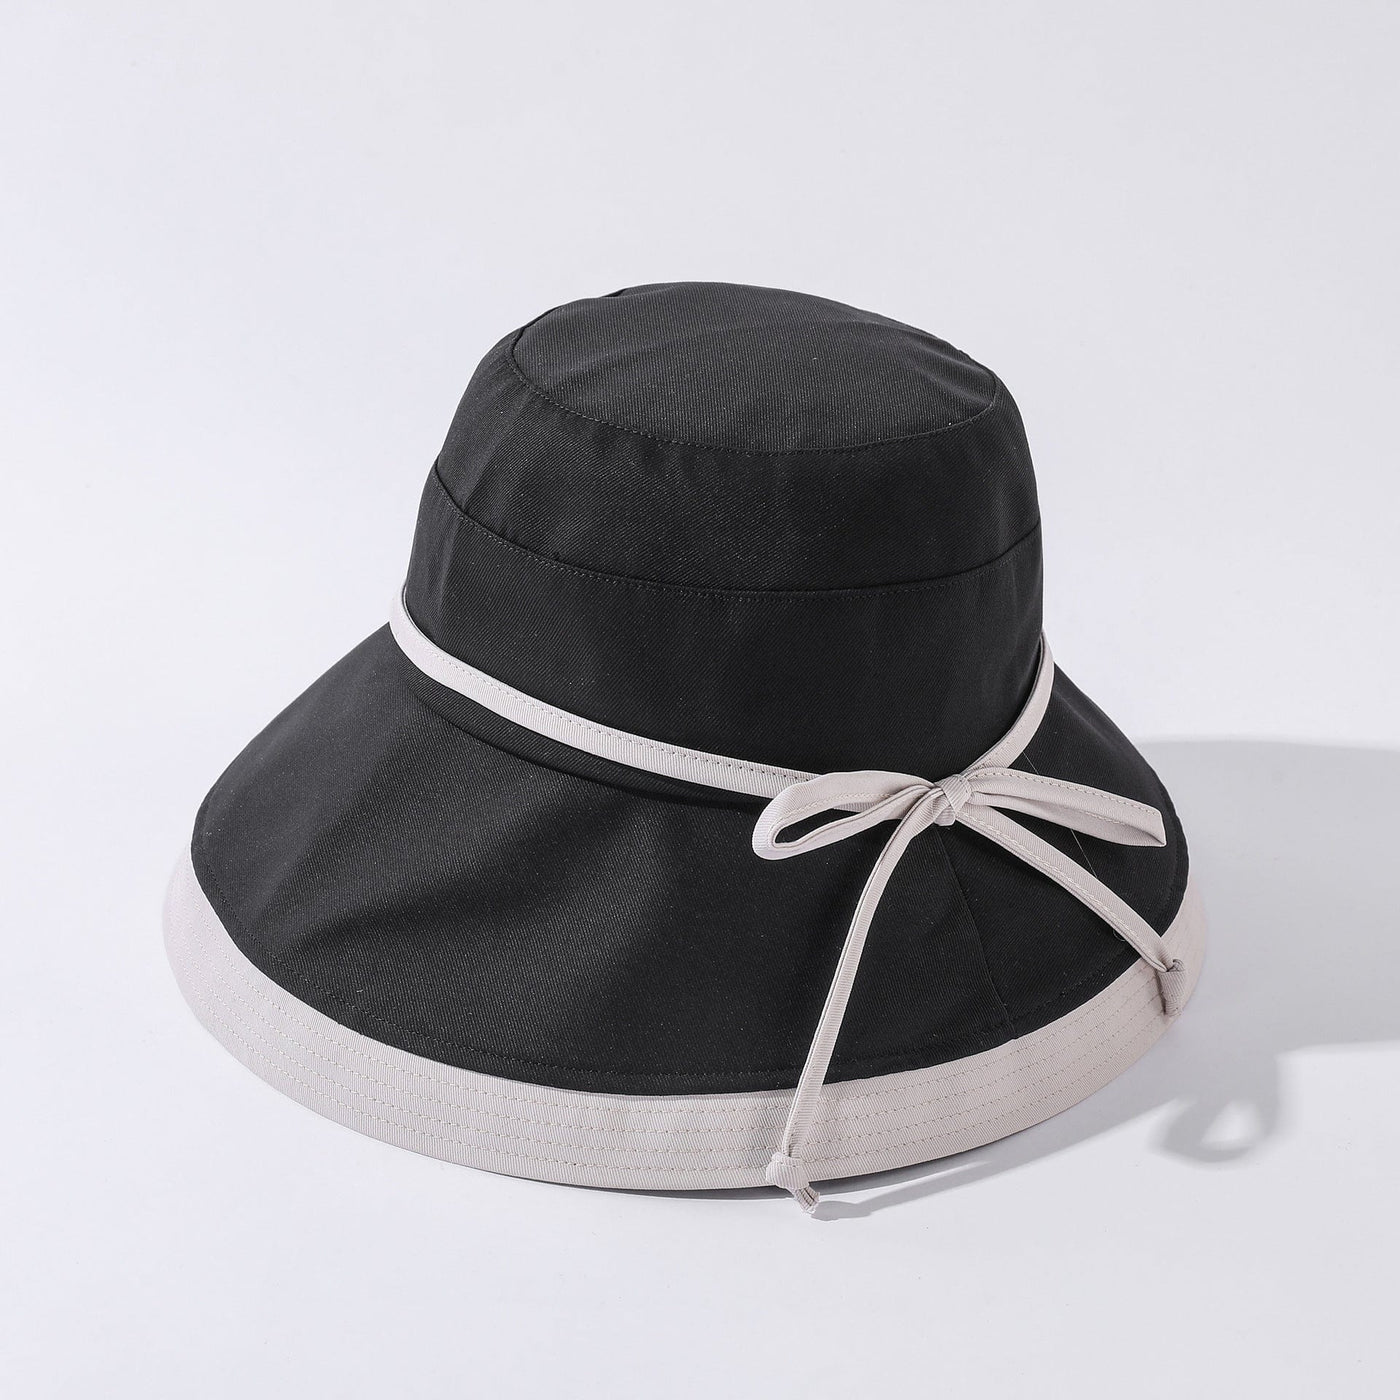 Women's Summer Solid Color Cloth Fisherman Hat